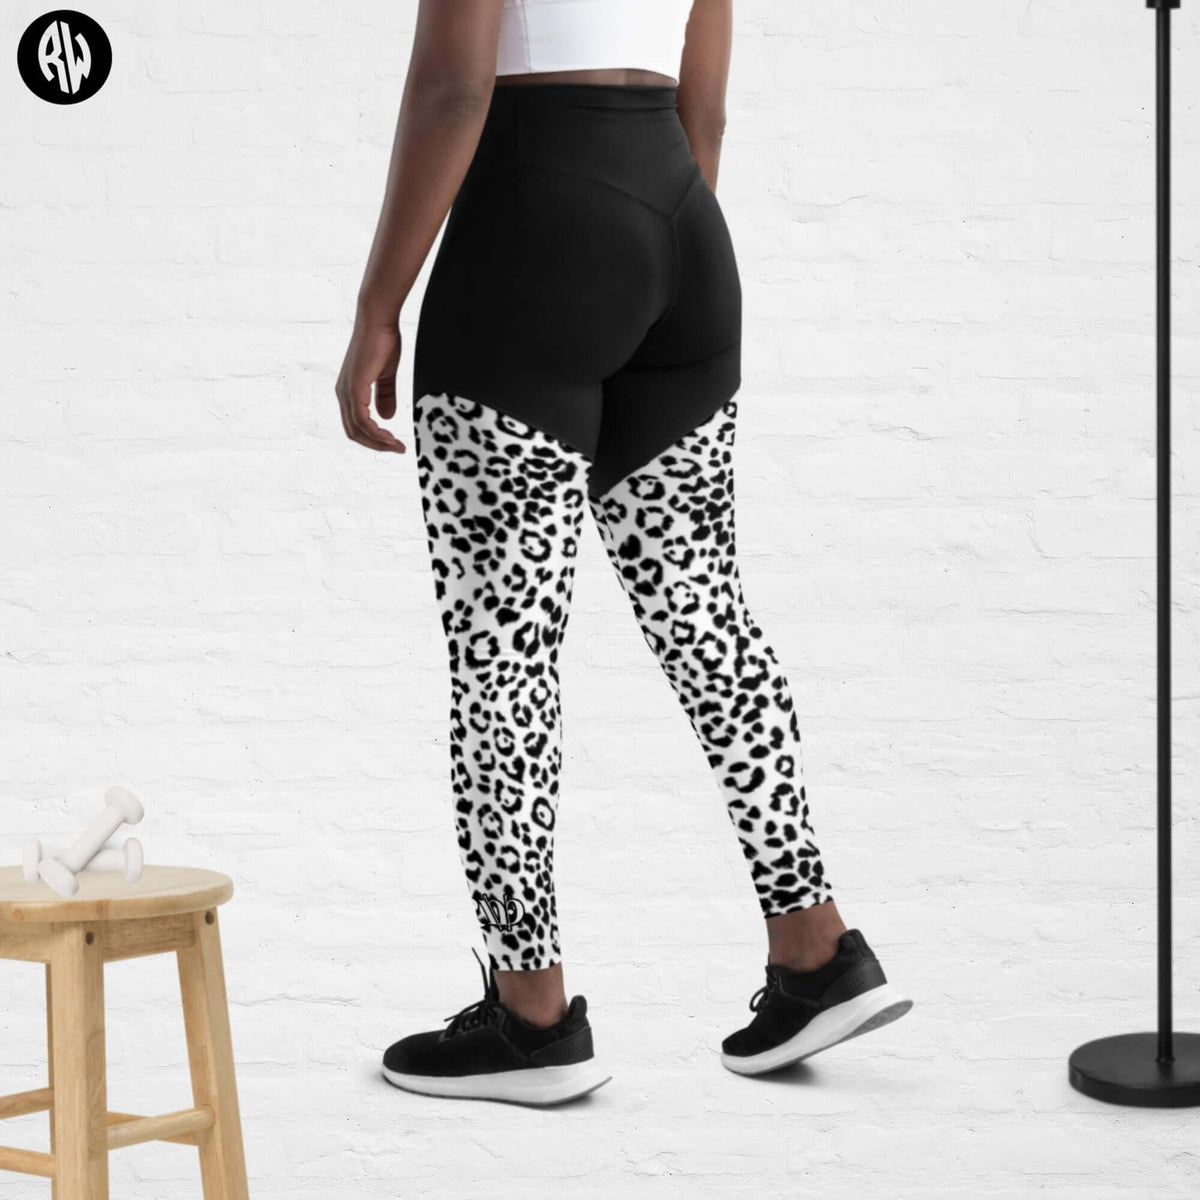 Sports Leggings with Phone Pocket in Black and White Print - Revive Wear     Enhance your workouts with Revive Wear AU&#39;s Sports Leggings featuring a convenient phone pocket. Stay connected and stylish during your fitness routine. Shop now!